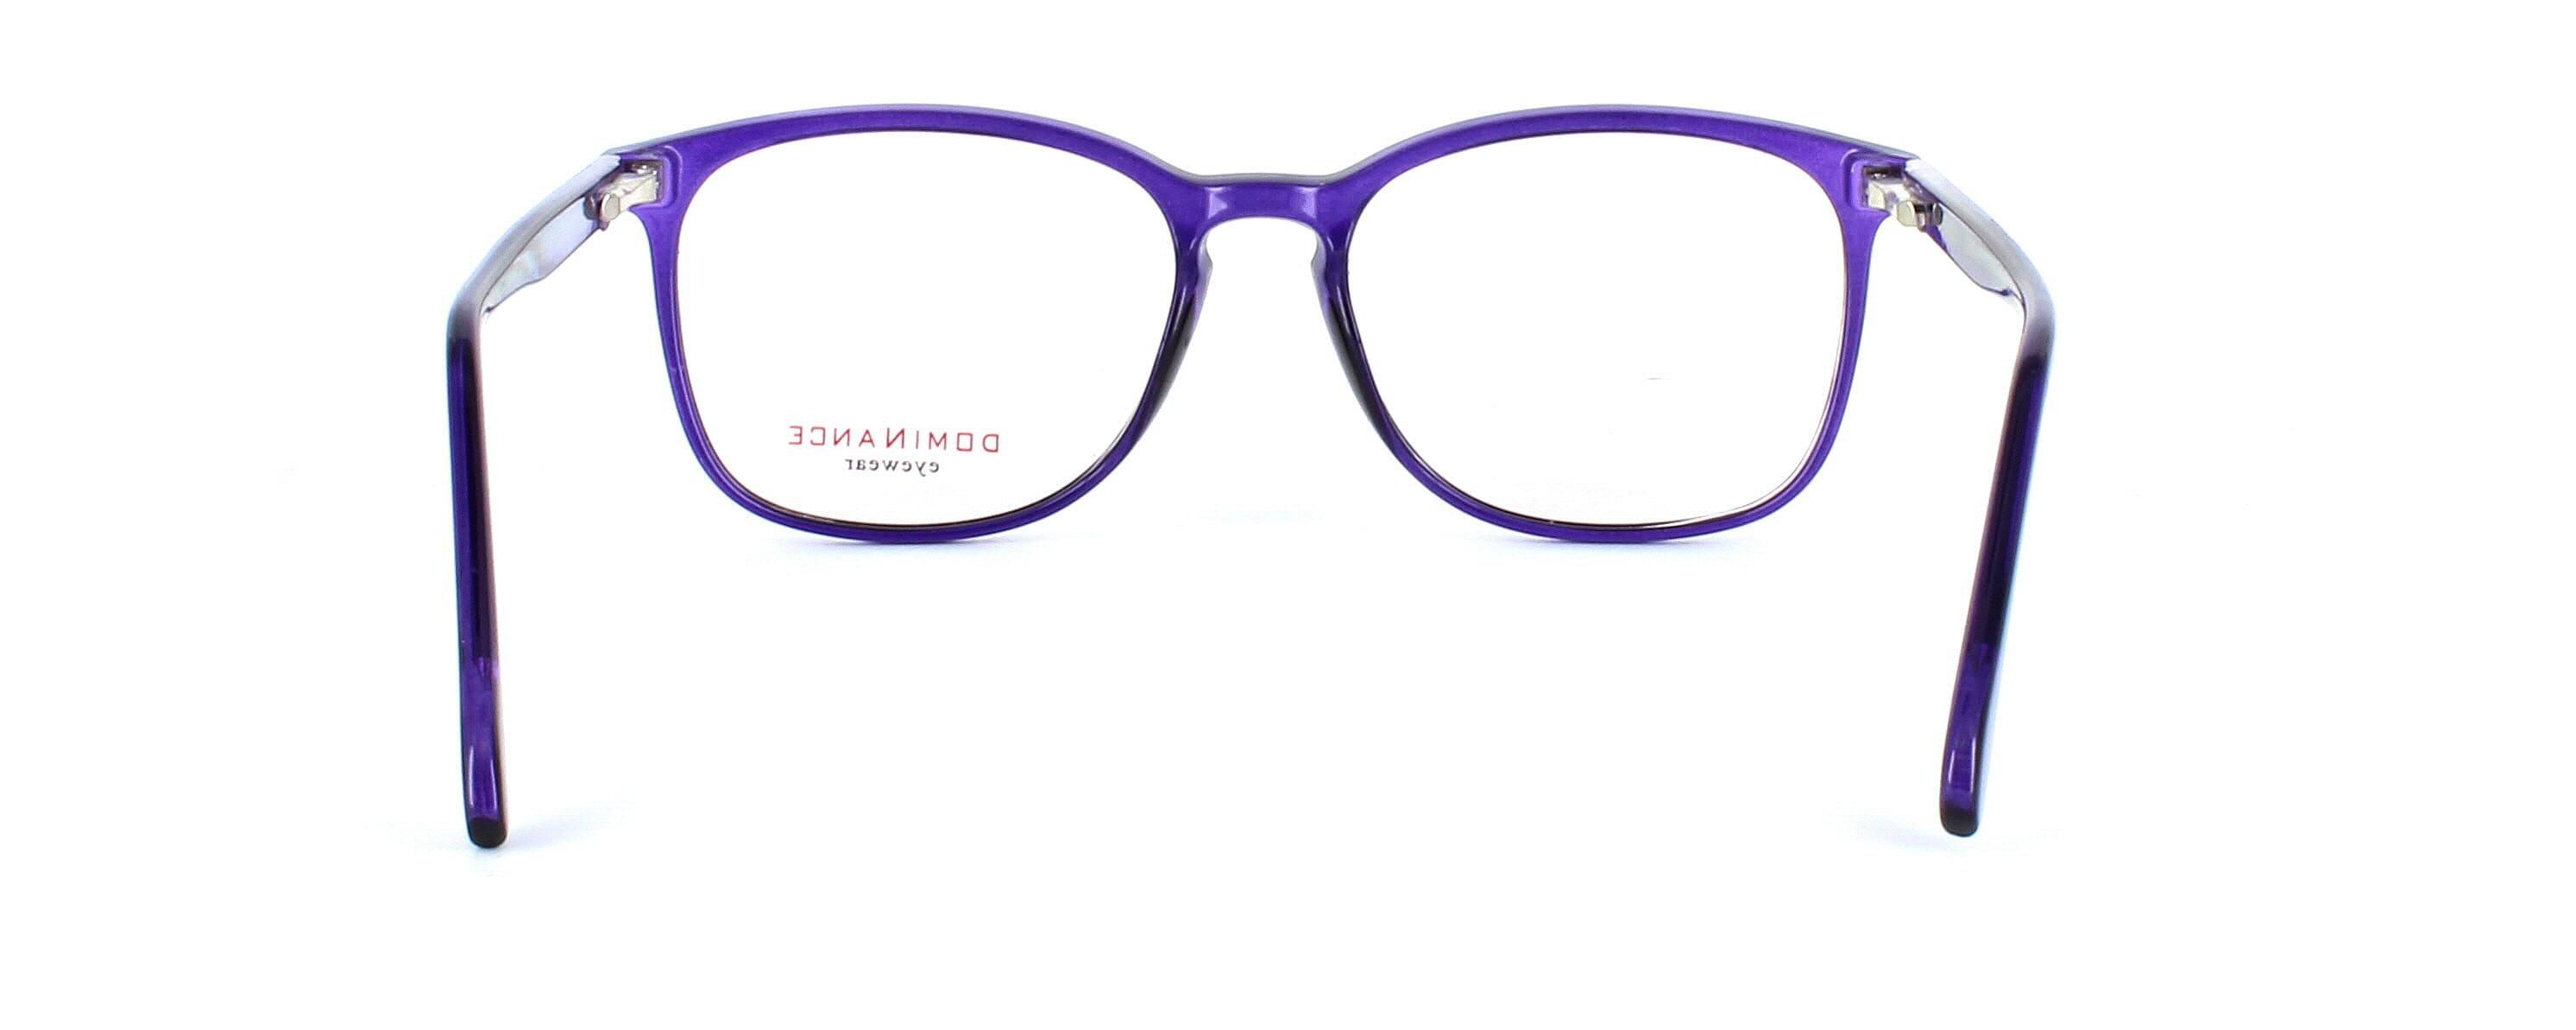 Liberty is a stylish unisex plastic glasses frame here in purple - image view 4